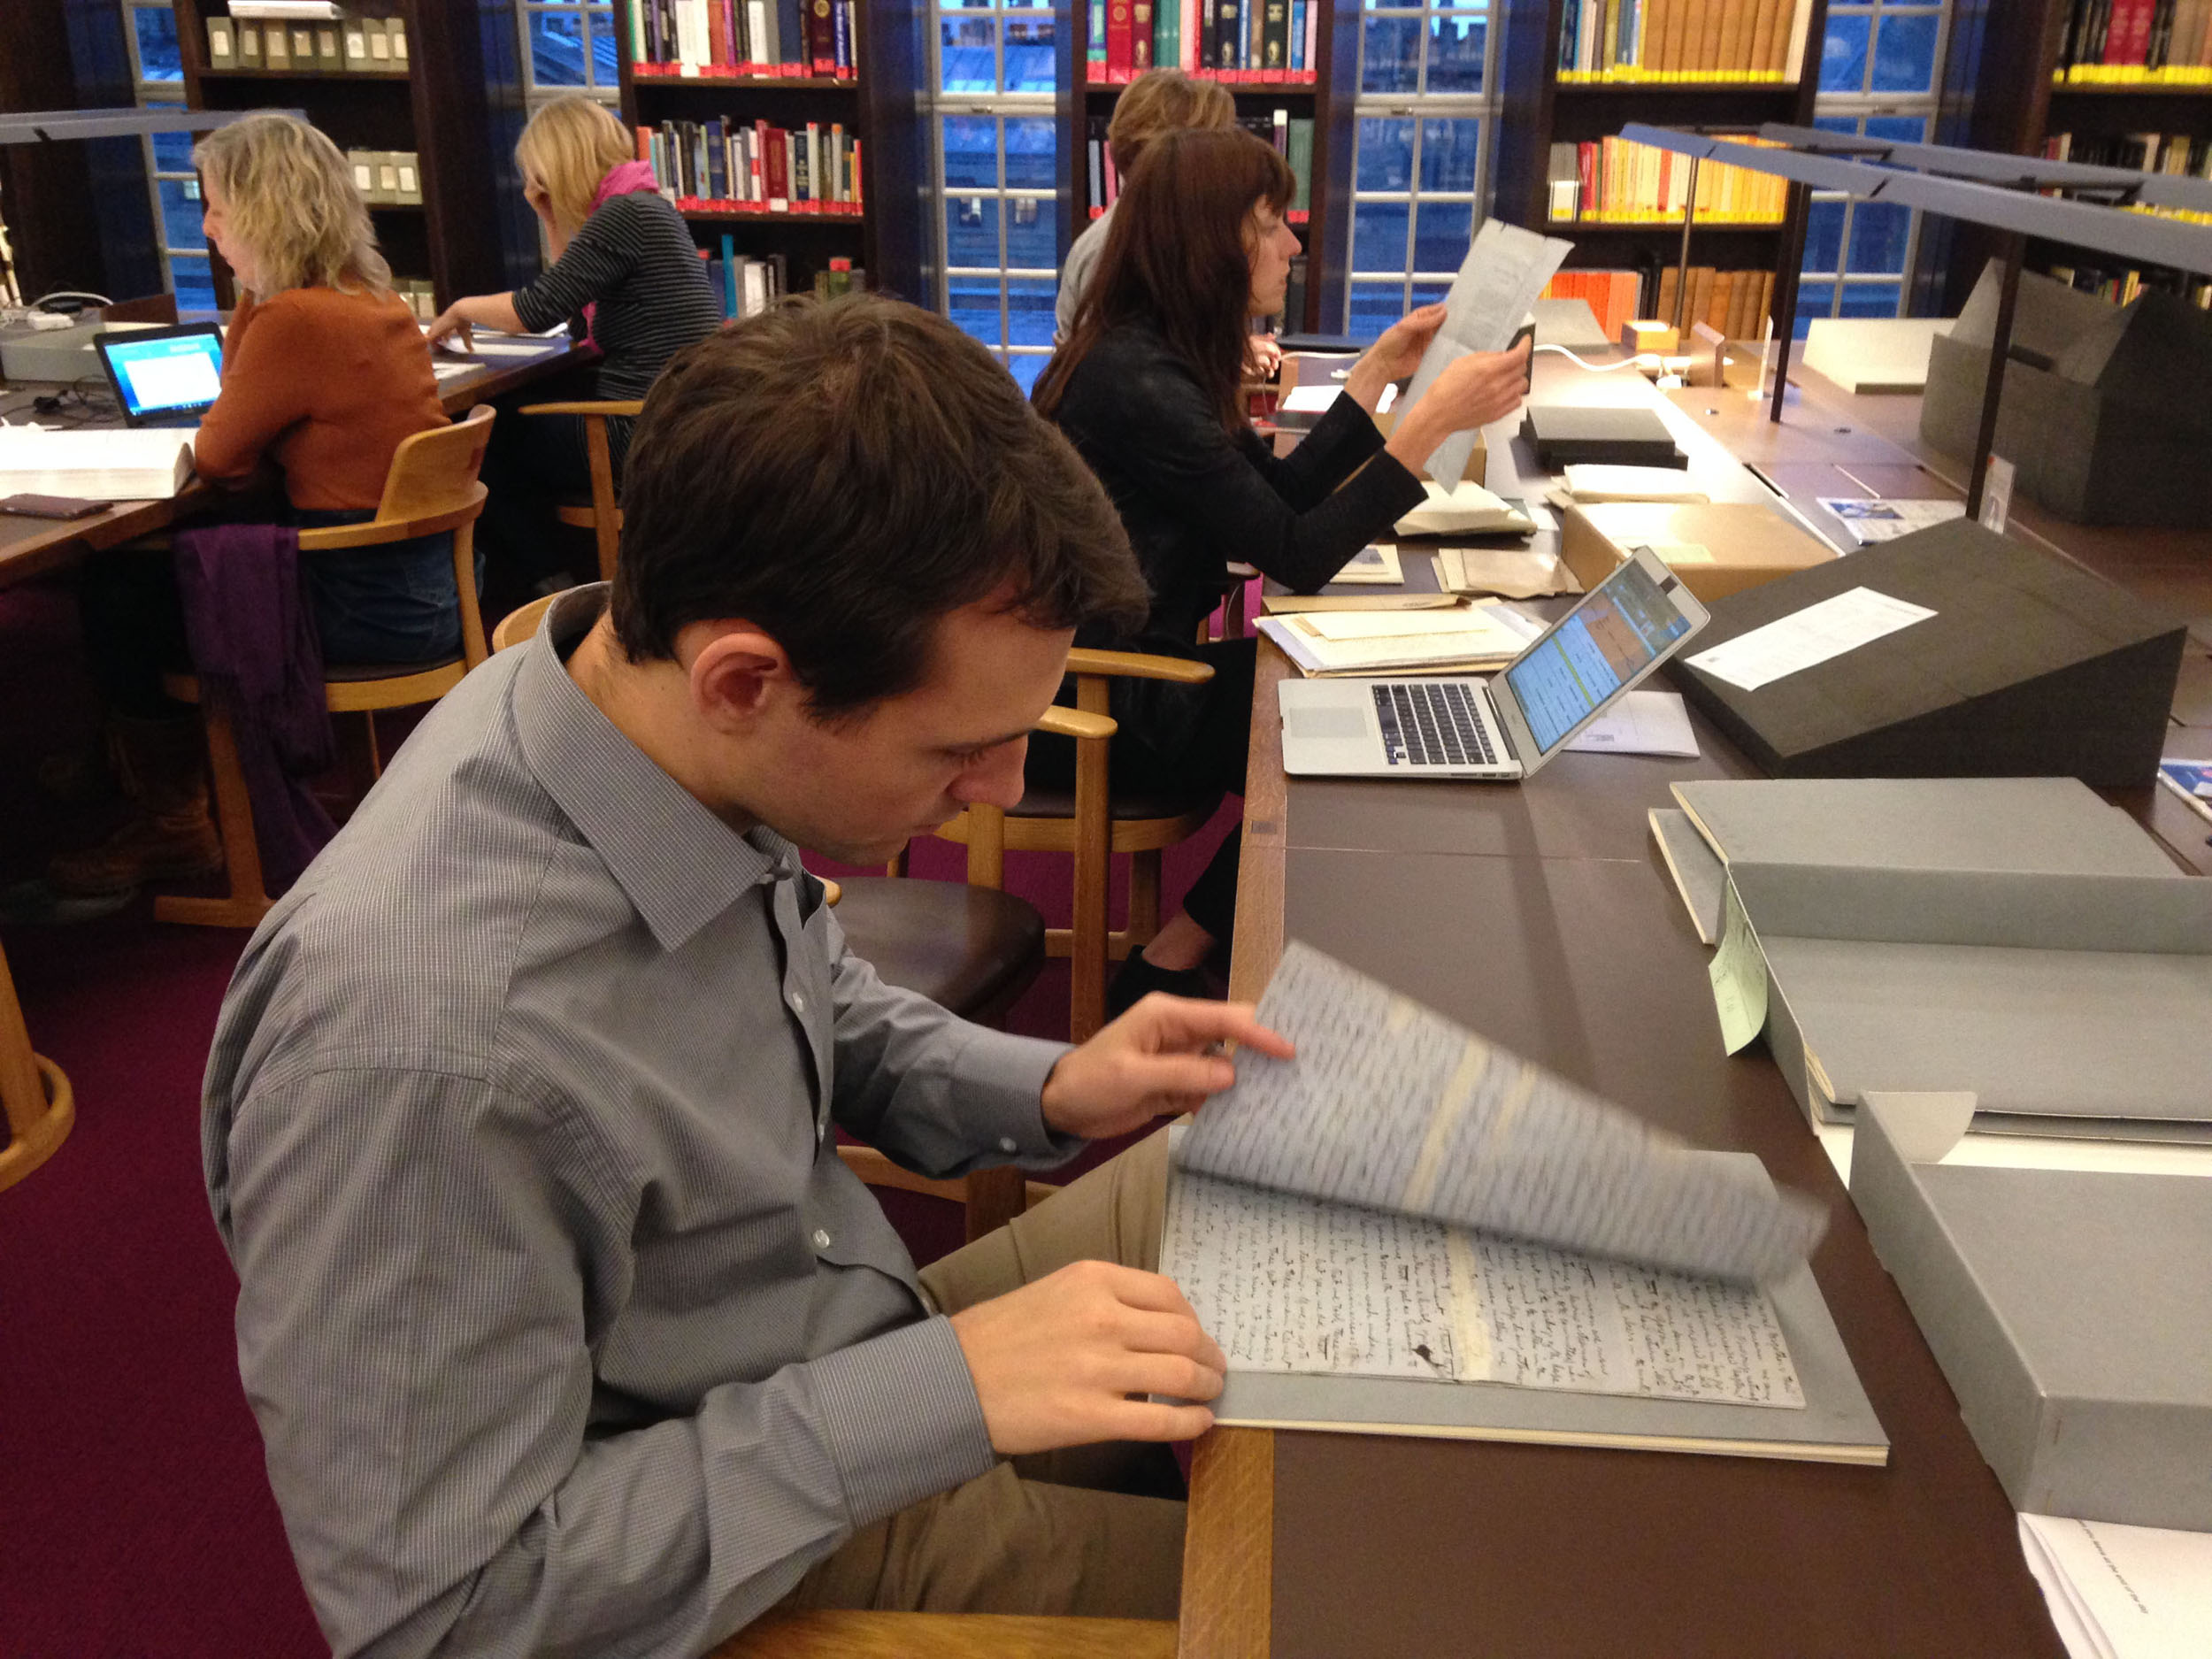 Nigel Banks (foreground) and Megan Ward (background) at the Weston Library with Livingstone manuscripts, 2016. Copyright Adrian S. Wisnicki. Creative Commons Attribution-NonCommercial 3.0 Unported (https://creativecommons.org/licenses/by-nc/3.0/).